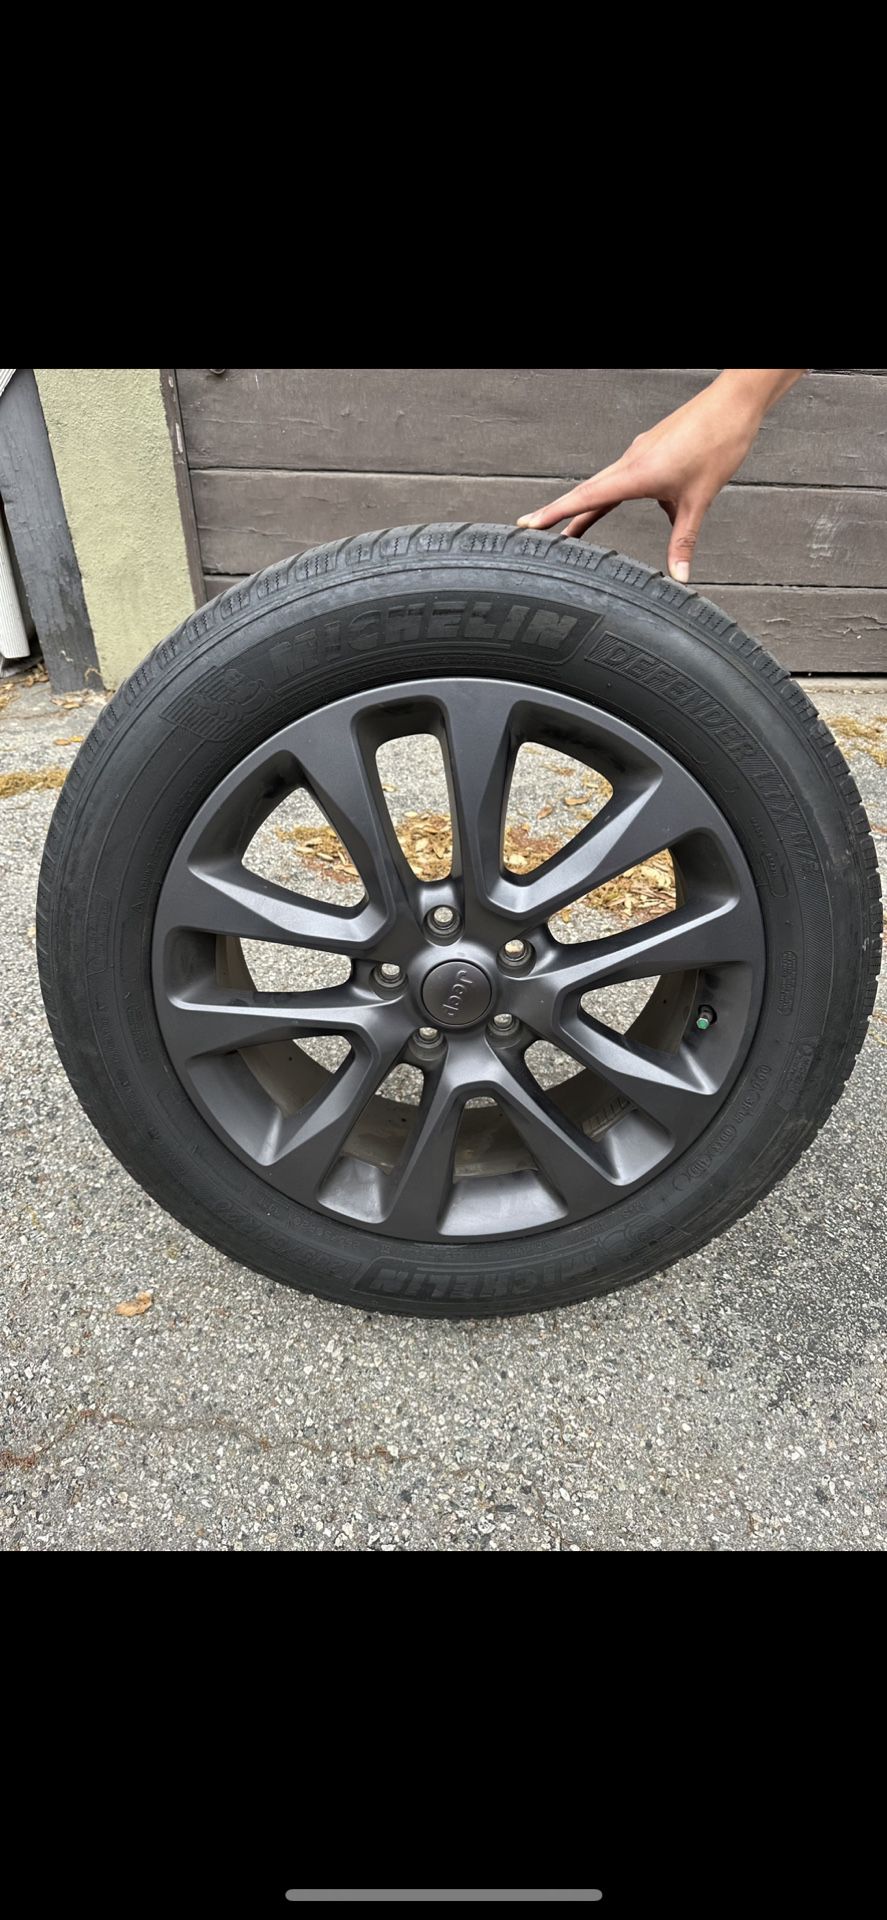 Grand Cherokee Tires And Wheels 